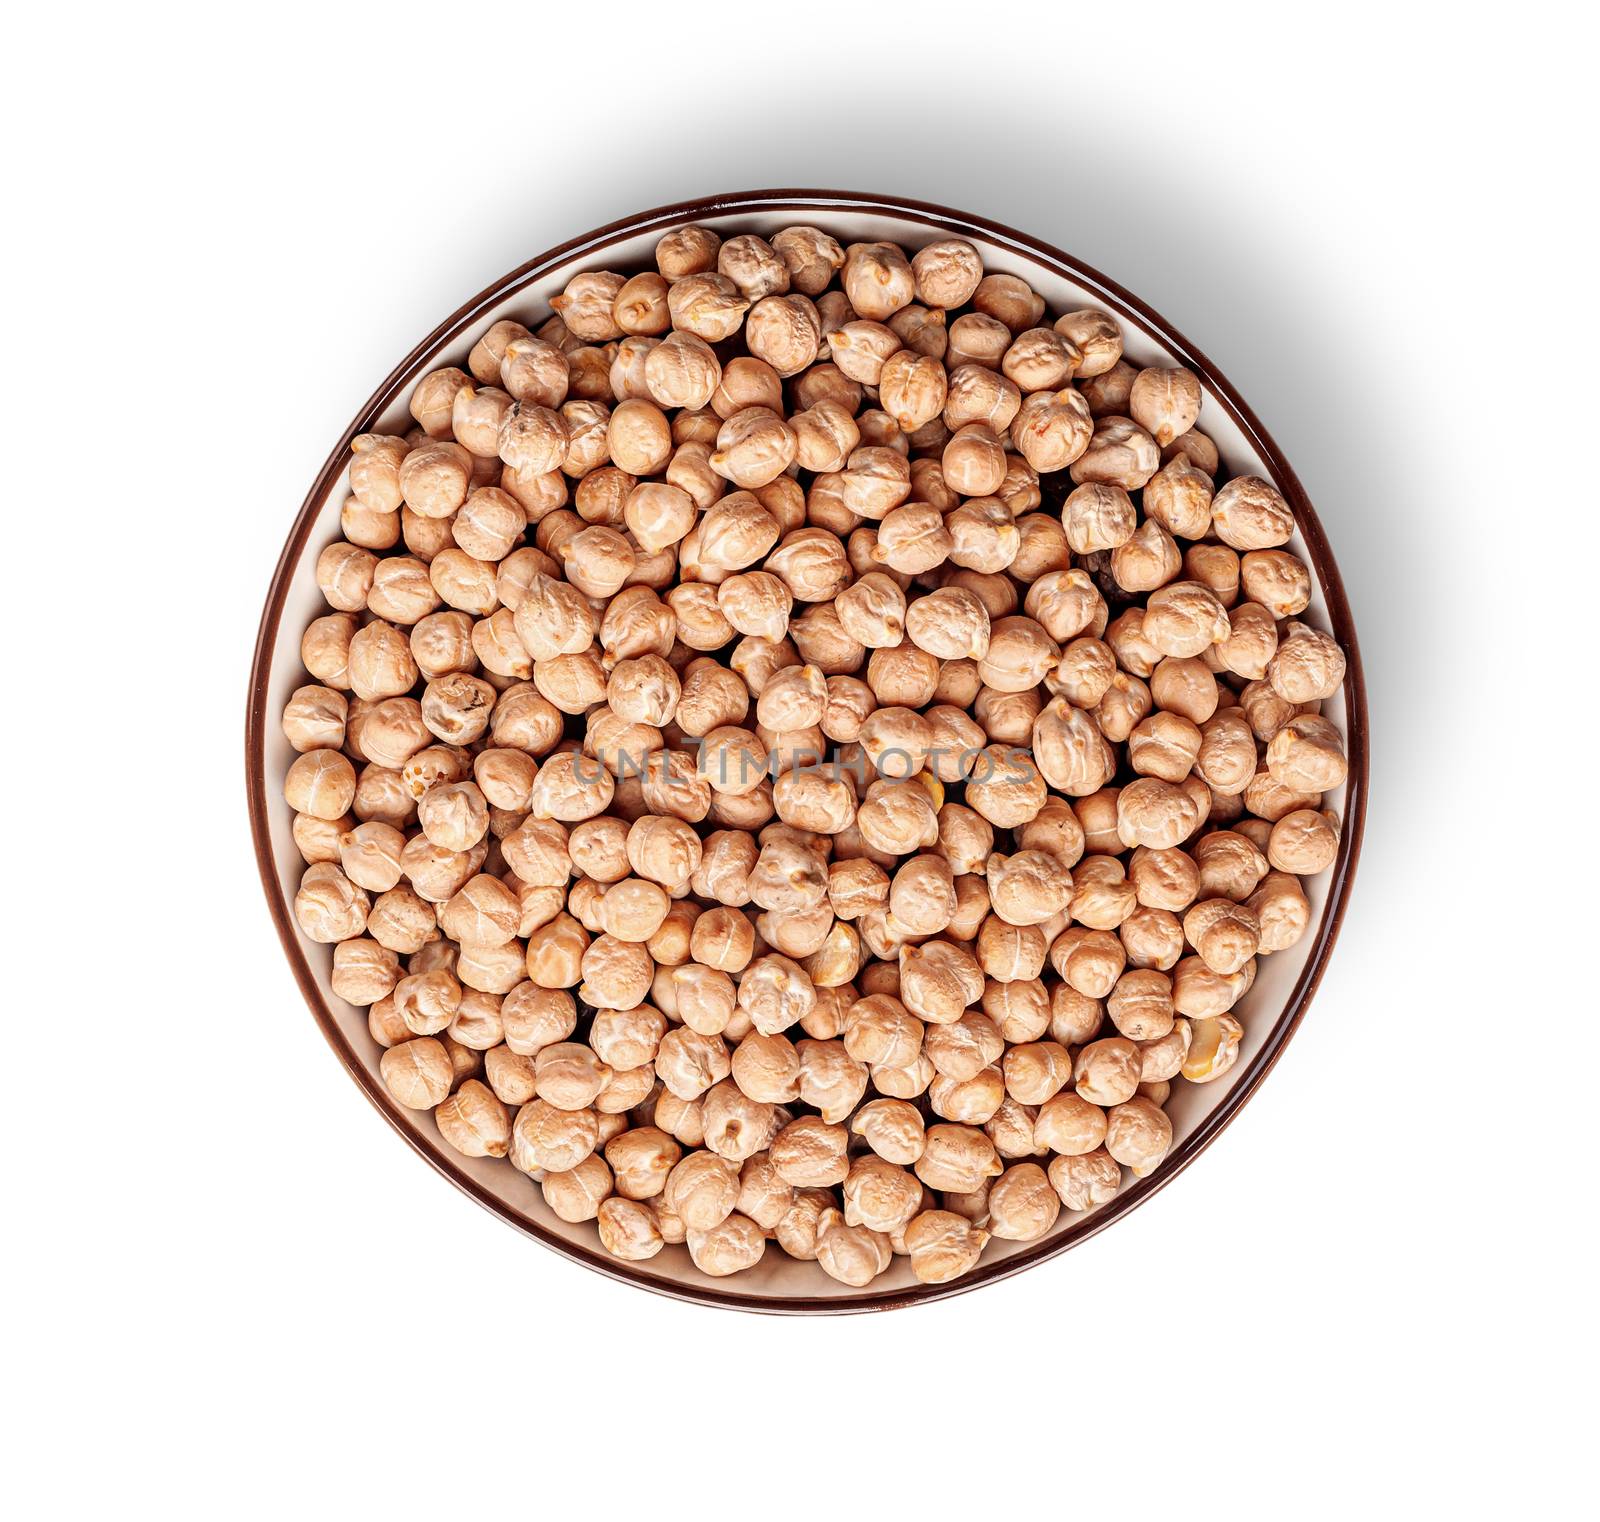 Chickpeas in a bowl top view by Cipariss